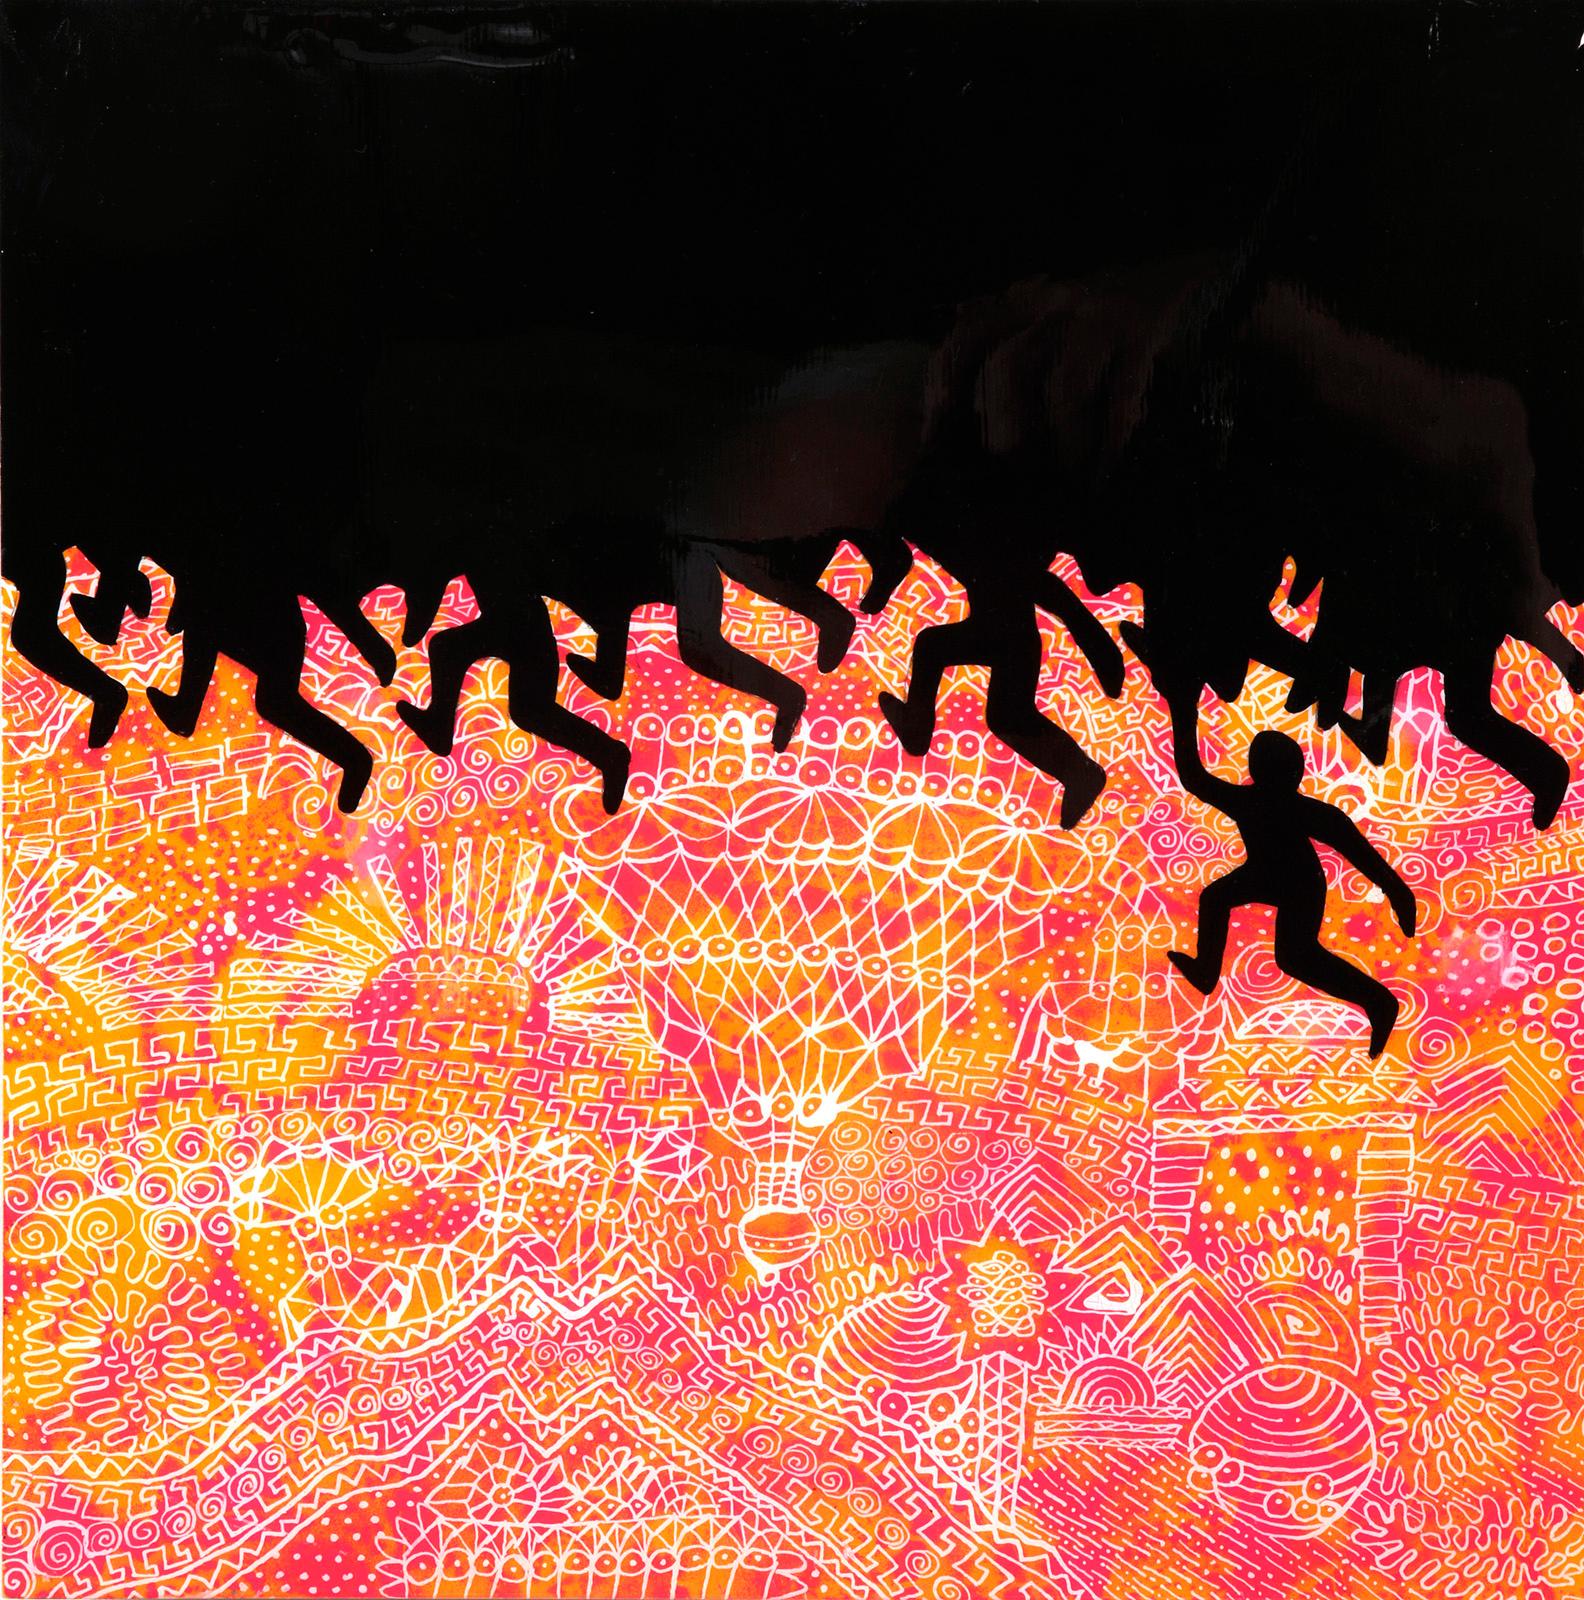 Rebecca Darlington Abstract Painting - "Rise Above", a crowd of silhouetted figures race across black, pink and orange 